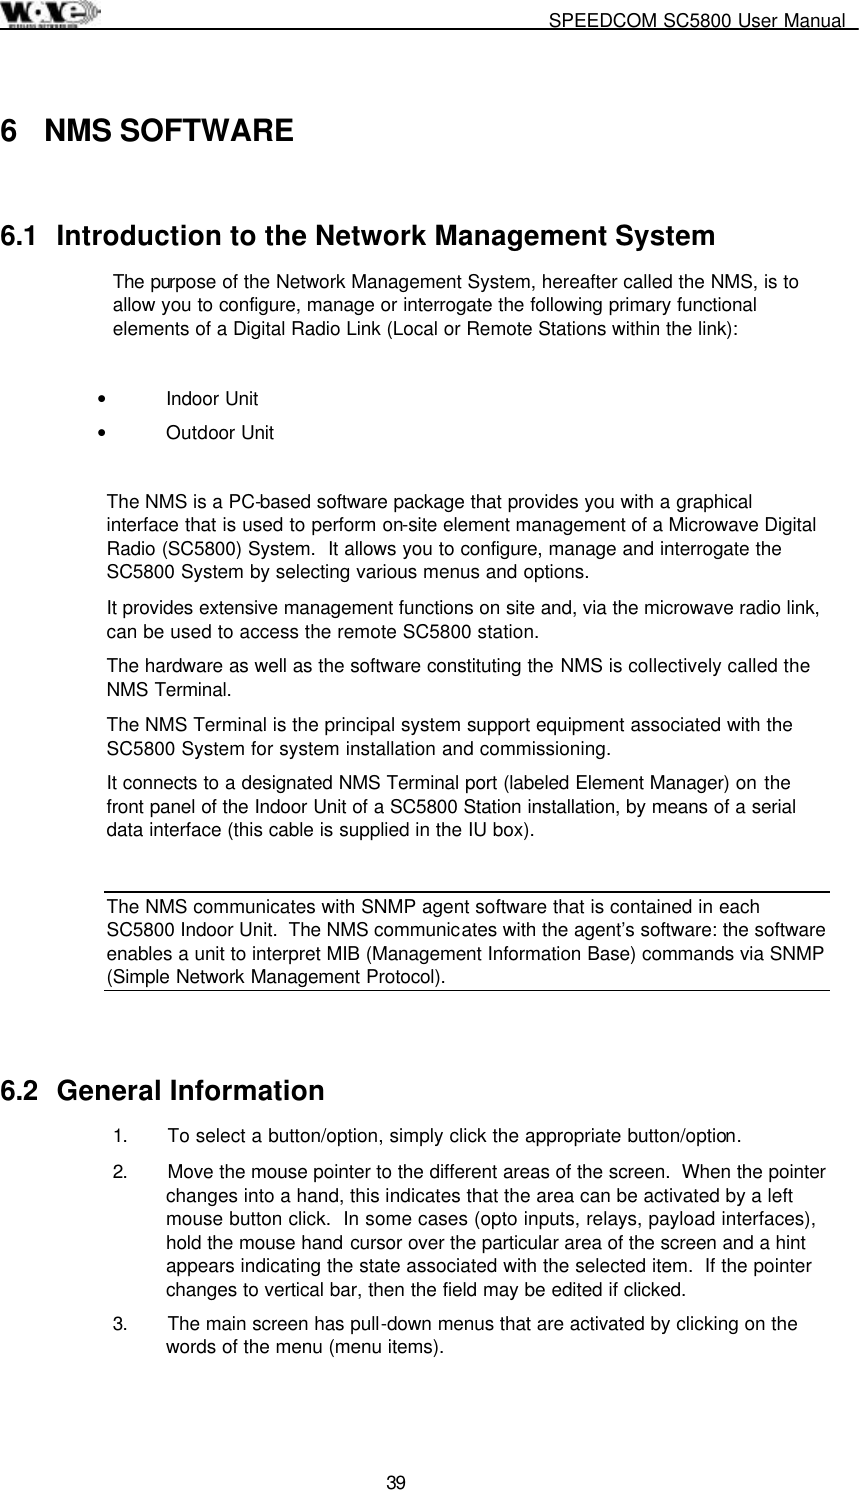     SPEEDCOM SC5800 User Manual  39  6 NMS SOFTWARE 6.1  Introduction to the Network Management System The purpose of the Network Management System, hereafter called the NMS, is to allow you to configure, manage or interrogate the following primary functional elements of a Digital Radio Link (Local or Remote Stations within the link):  •  Indoor Unit •  Outdoor Unit  The NMS is a PC-based software package that provides you with a graphical interface that is used to perform on-site element management of a Microwave Digital Radio (SC5800) System.  It allows you to configure, manage and interrogate the SC5800 System by selecting various menus and options. It provides extensive management functions on site and, via the microwave radio link, can be used to access the remote SC5800 station. The hardware as well as the software constituting the NMS is collectively called the NMS Terminal. The NMS Terminal is the principal system support equipment associated with the SC5800 System for system installation and commissioning. It connects to a designated NMS Terminal port (labeled Element Manager) on the front panel of the Indoor Unit of a SC5800 Station installation, by means of a serial data interface (this cable is supplied in the IU box).  The NMS communicates with SNMP agent software that is contained in each SC5800 Indoor Unit.  The NMS communicates with the agent’s software: the software enables a unit to interpret MIB (Management Information Base) commands via SNMP (Simple Network Management Protocol).       6.2 General Information 1.  To select a button/option, simply click the appropriate button/option. 2.  Move the mouse pointer to the different areas of the screen.  When the pointer changes into a hand, this indicates that the area can be activated by a left mouse button click.  In some cases (opto inputs, relays, payload interfaces), hold the mouse hand cursor over the particular area of the screen and a hint appears indicating the state associated with the selected item.  If the pointer changes to vertical bar, then the field may be edited if clicked. 3.  The main screen has pull-down menus that are activated by clicking on the words of the menu (menu items).   